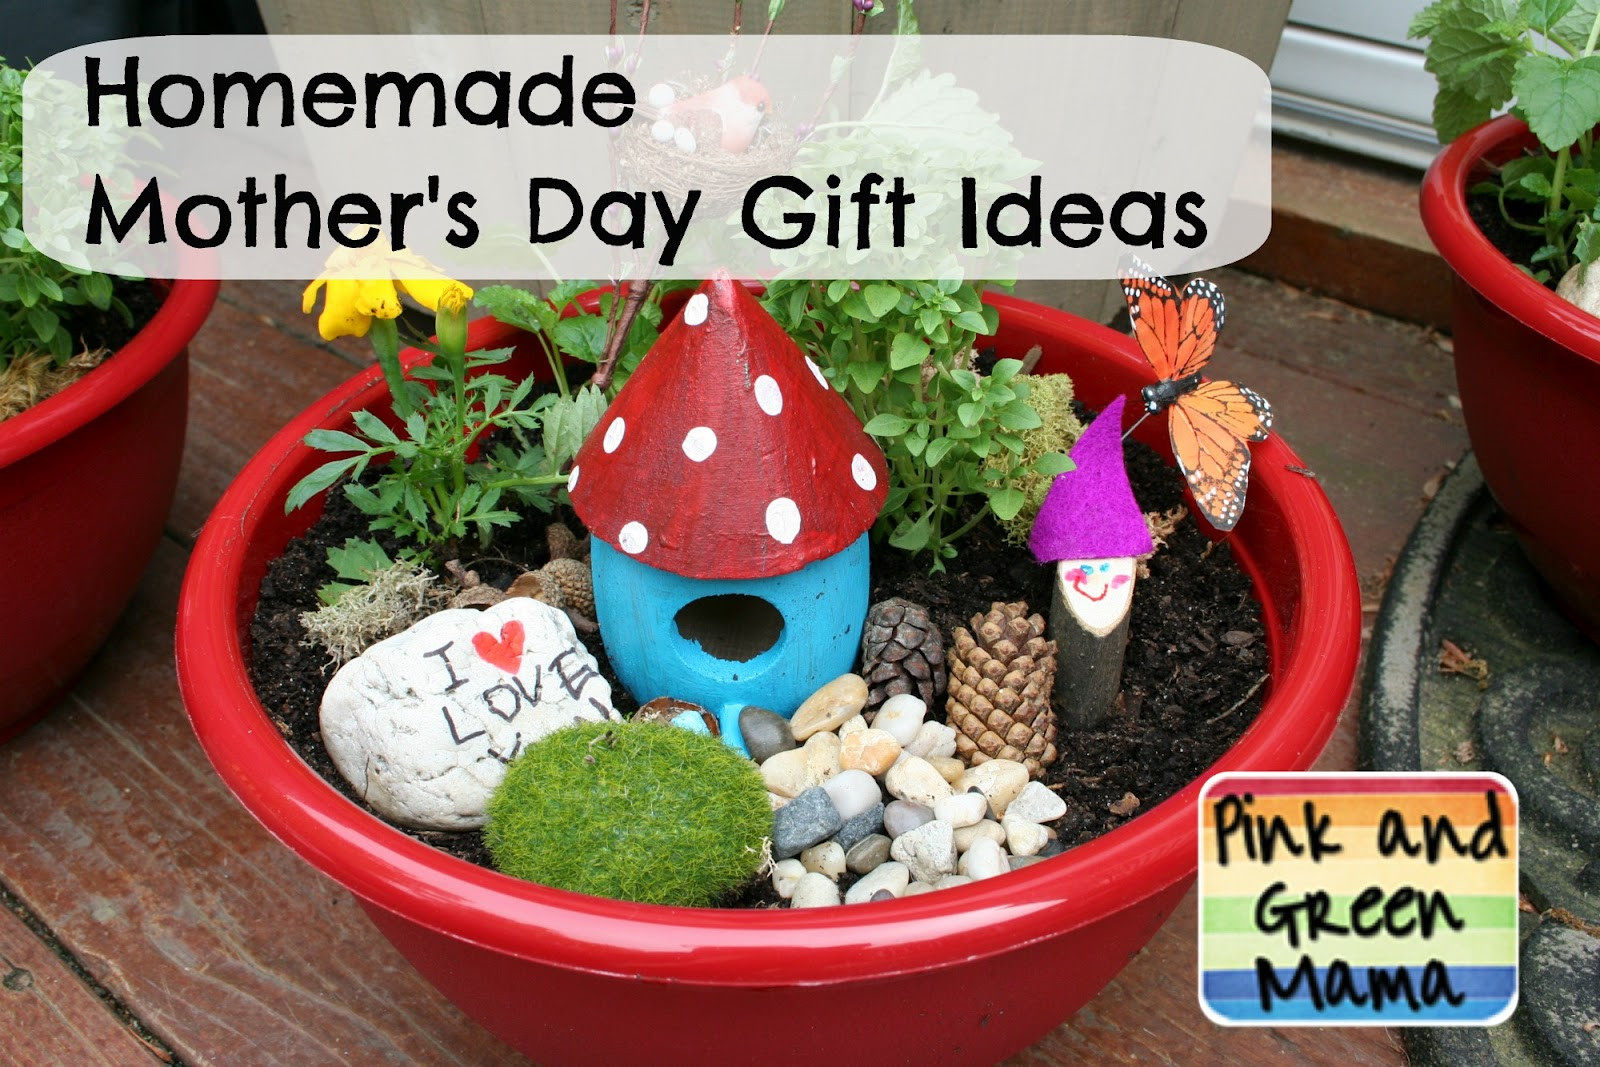 Homemade Mothers Day Gifts For Kids
 Pink and Green Mama Homemade Mother s Day Gift Ideas